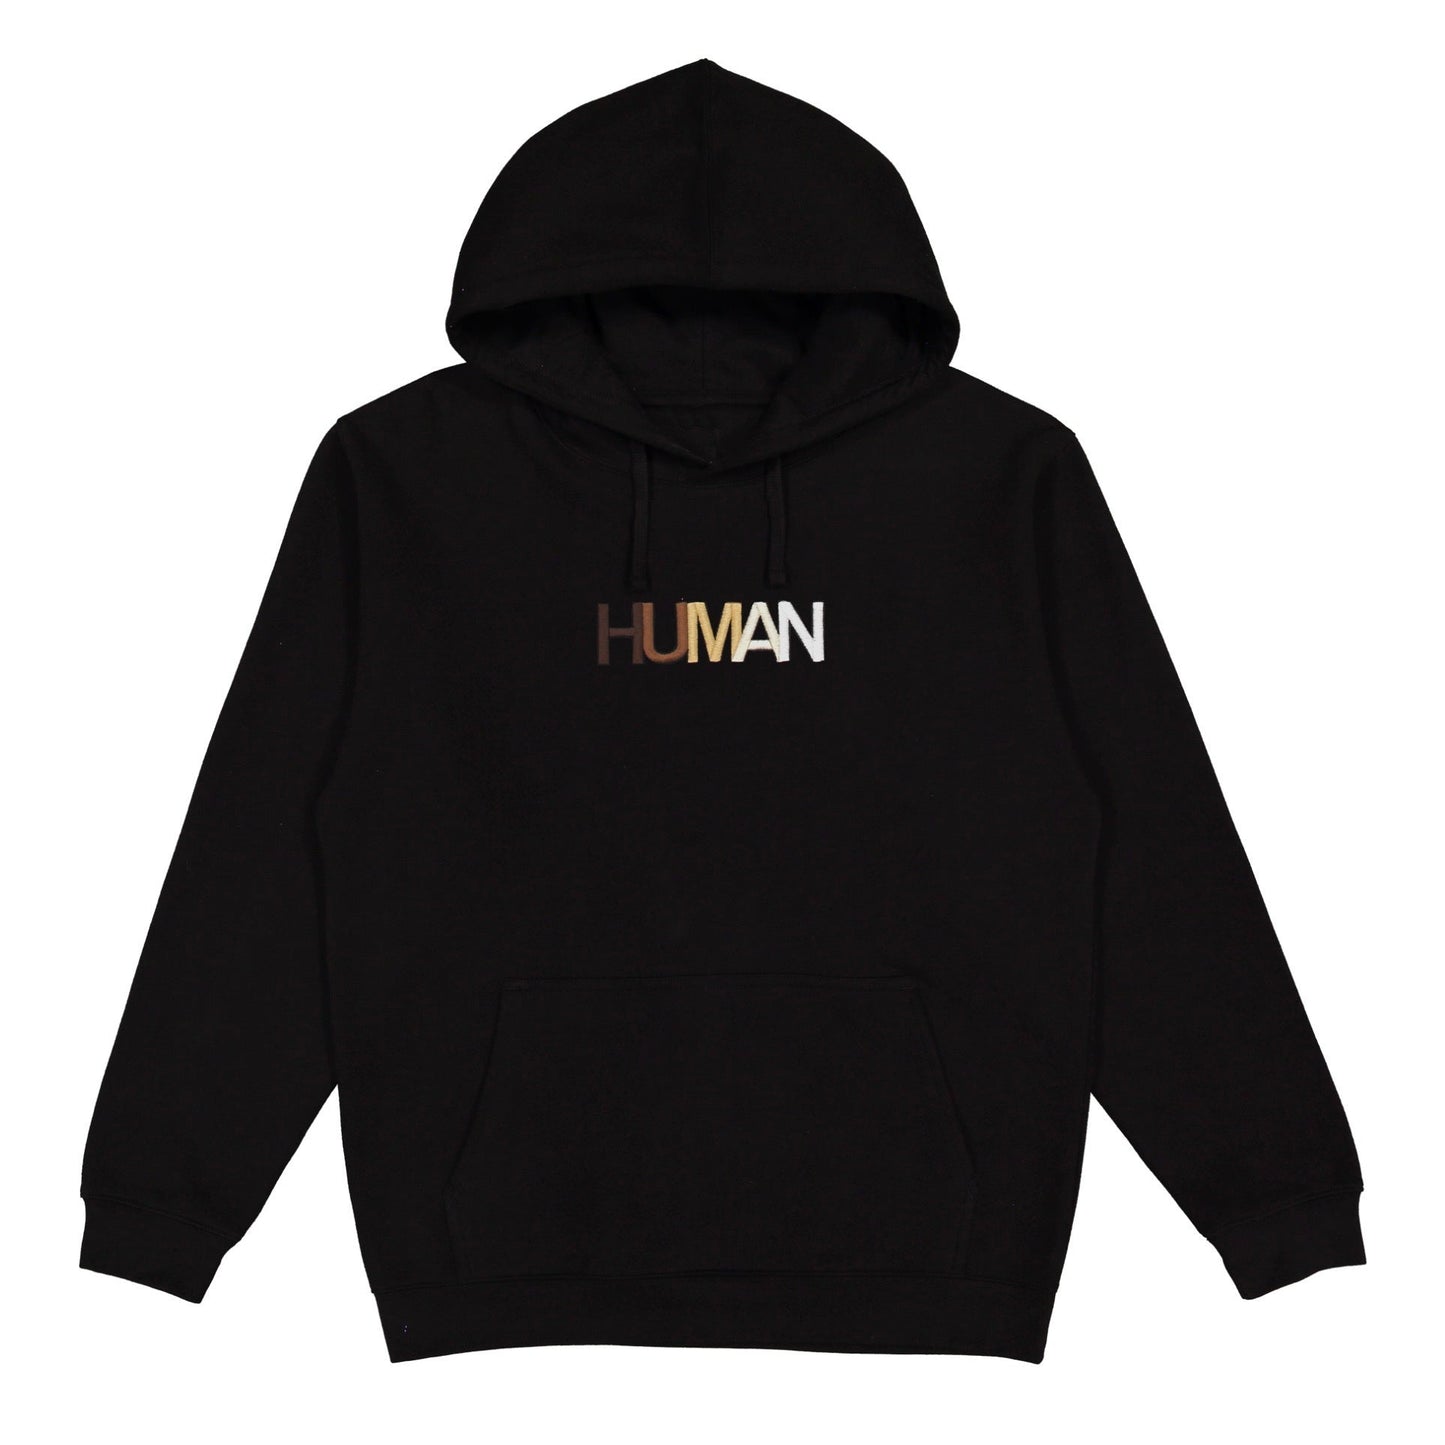 Wear The Peace Human Embroidered Black Hoodie